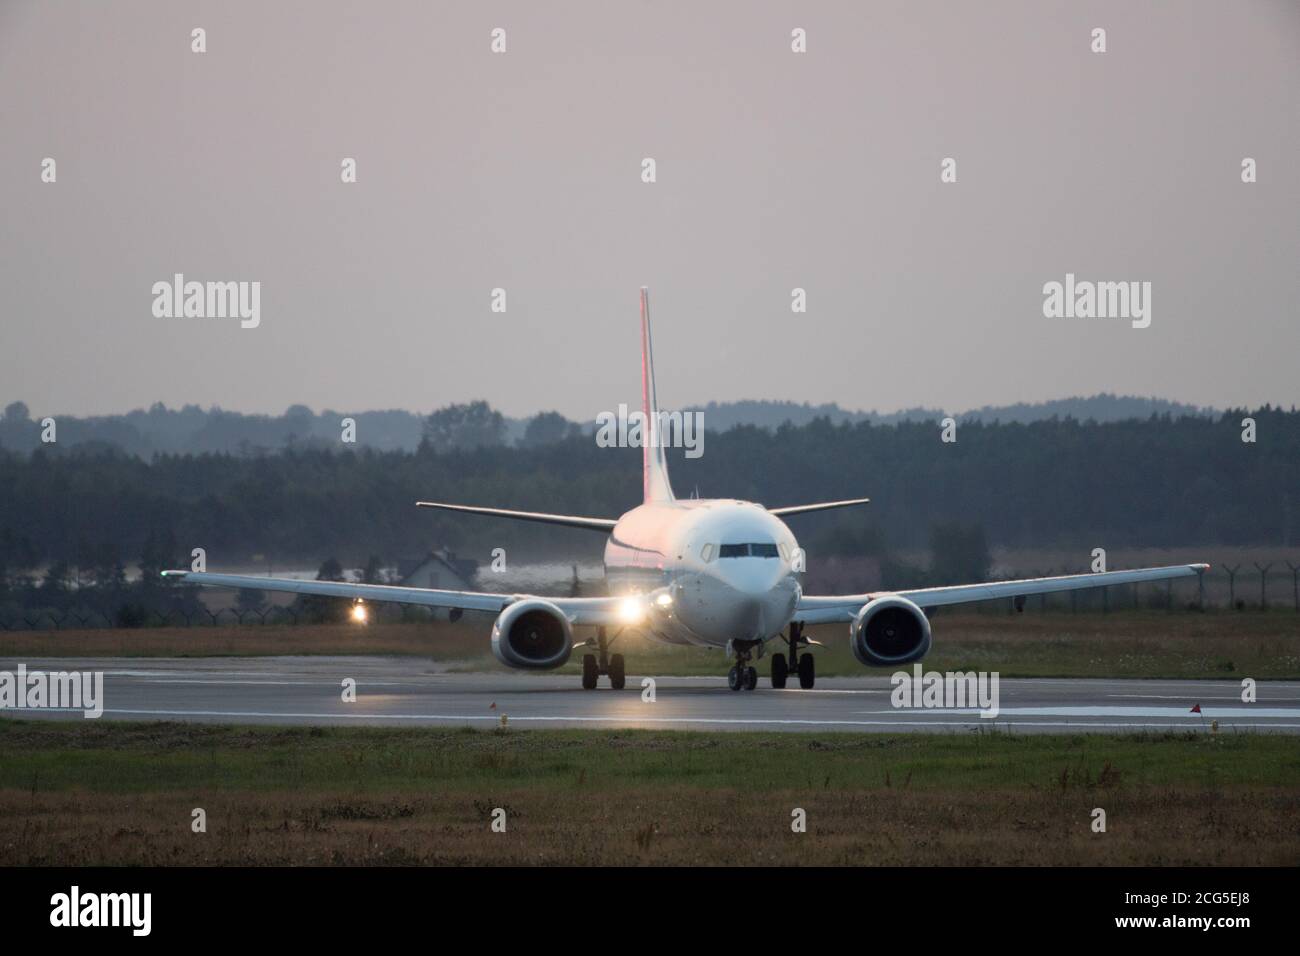 Low cost airline Wizz Air aircraft Airbus A320-232 in Gdansk, Poland. August 7th 2020 © Wojciech Strozyk / Alamy Stock Photo *** Local Caption *** Stock Photo